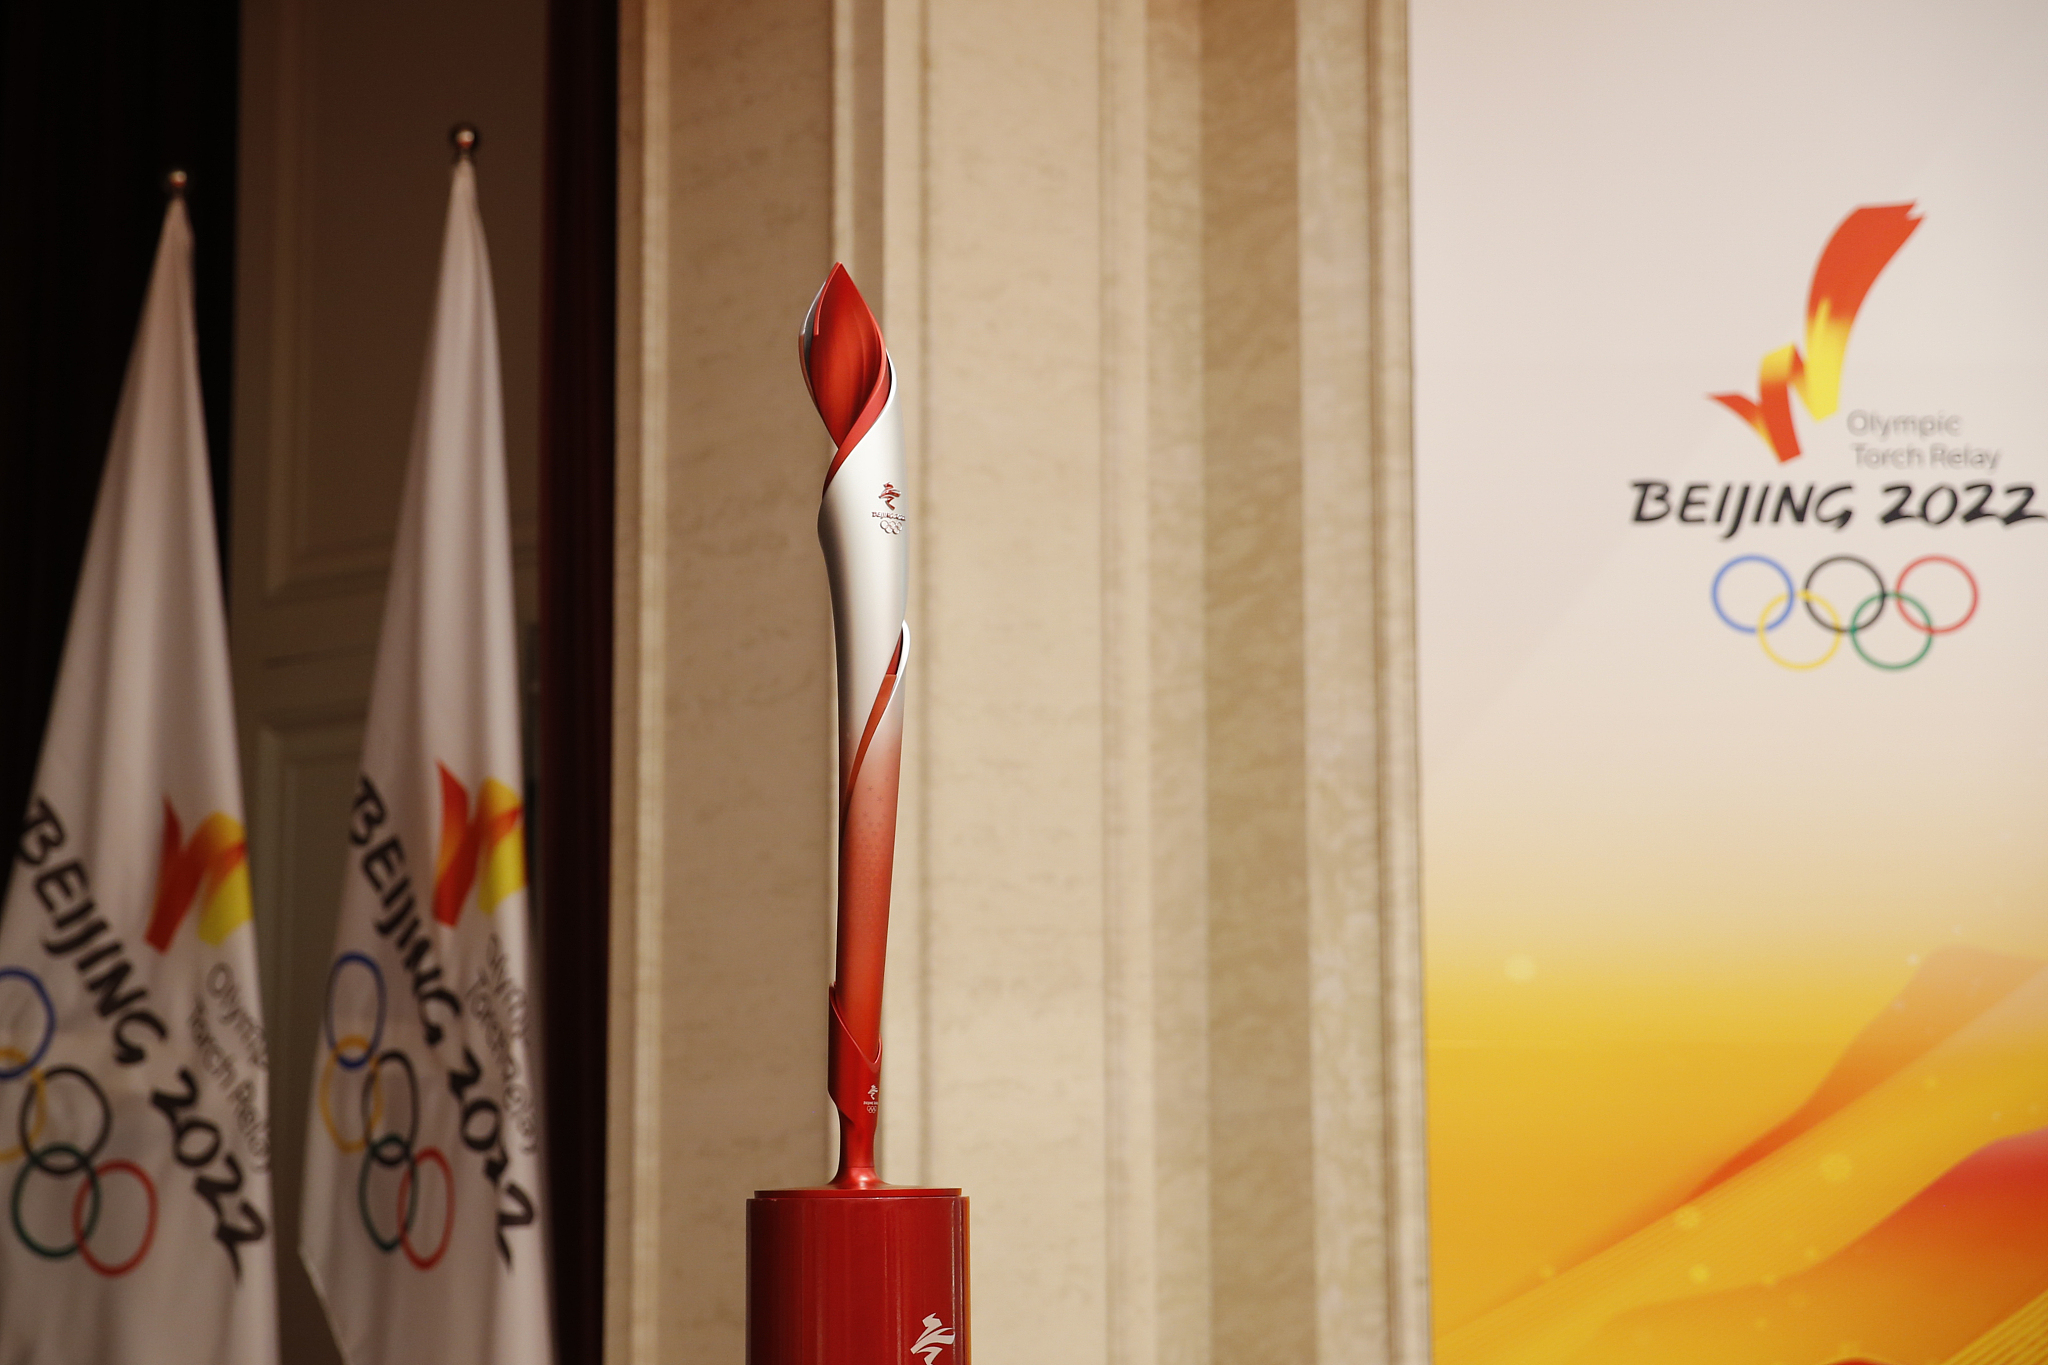 The torch for the Beijing 2022 Winter Olympics is shown on January 5, 2022, in Harbin, Heilongjiang. /CFP